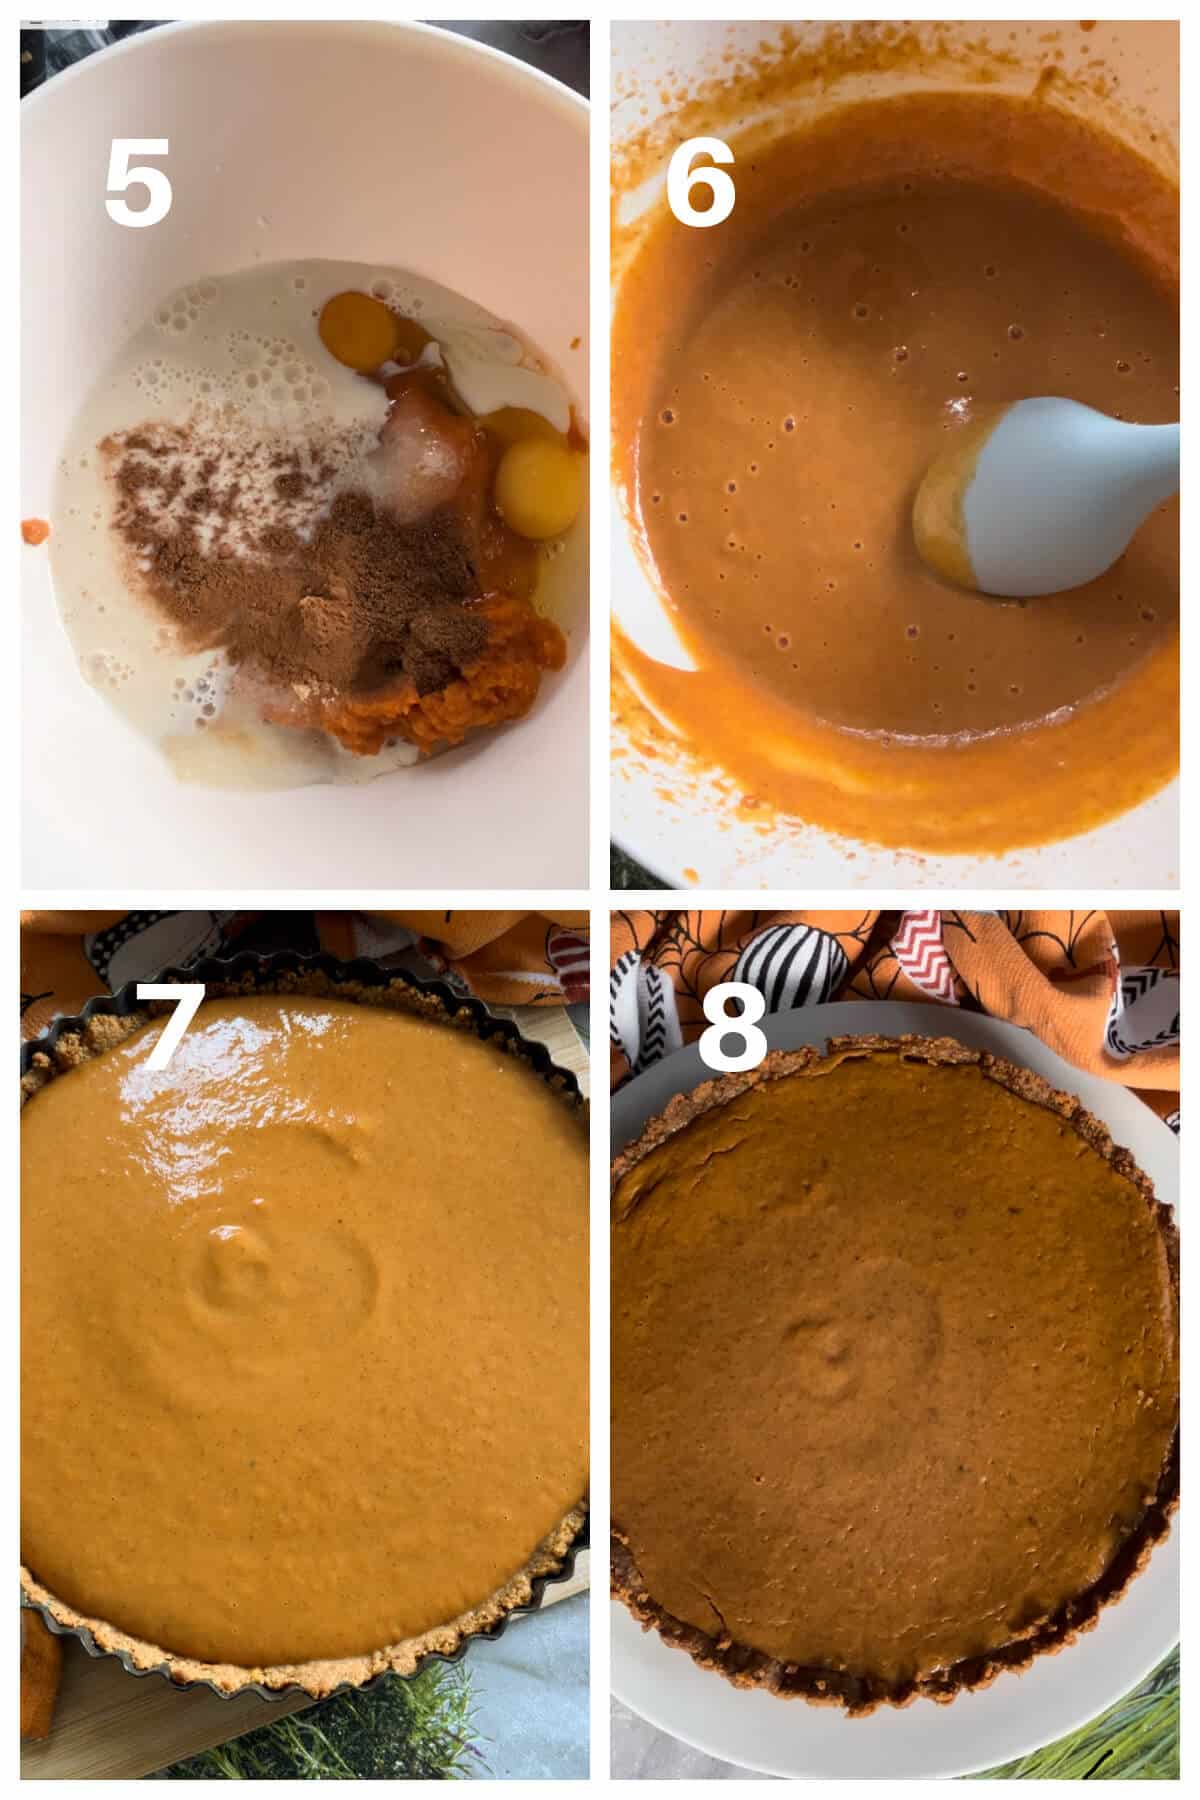 Collage of 4 photos to show how to make pumpkin pie filling.